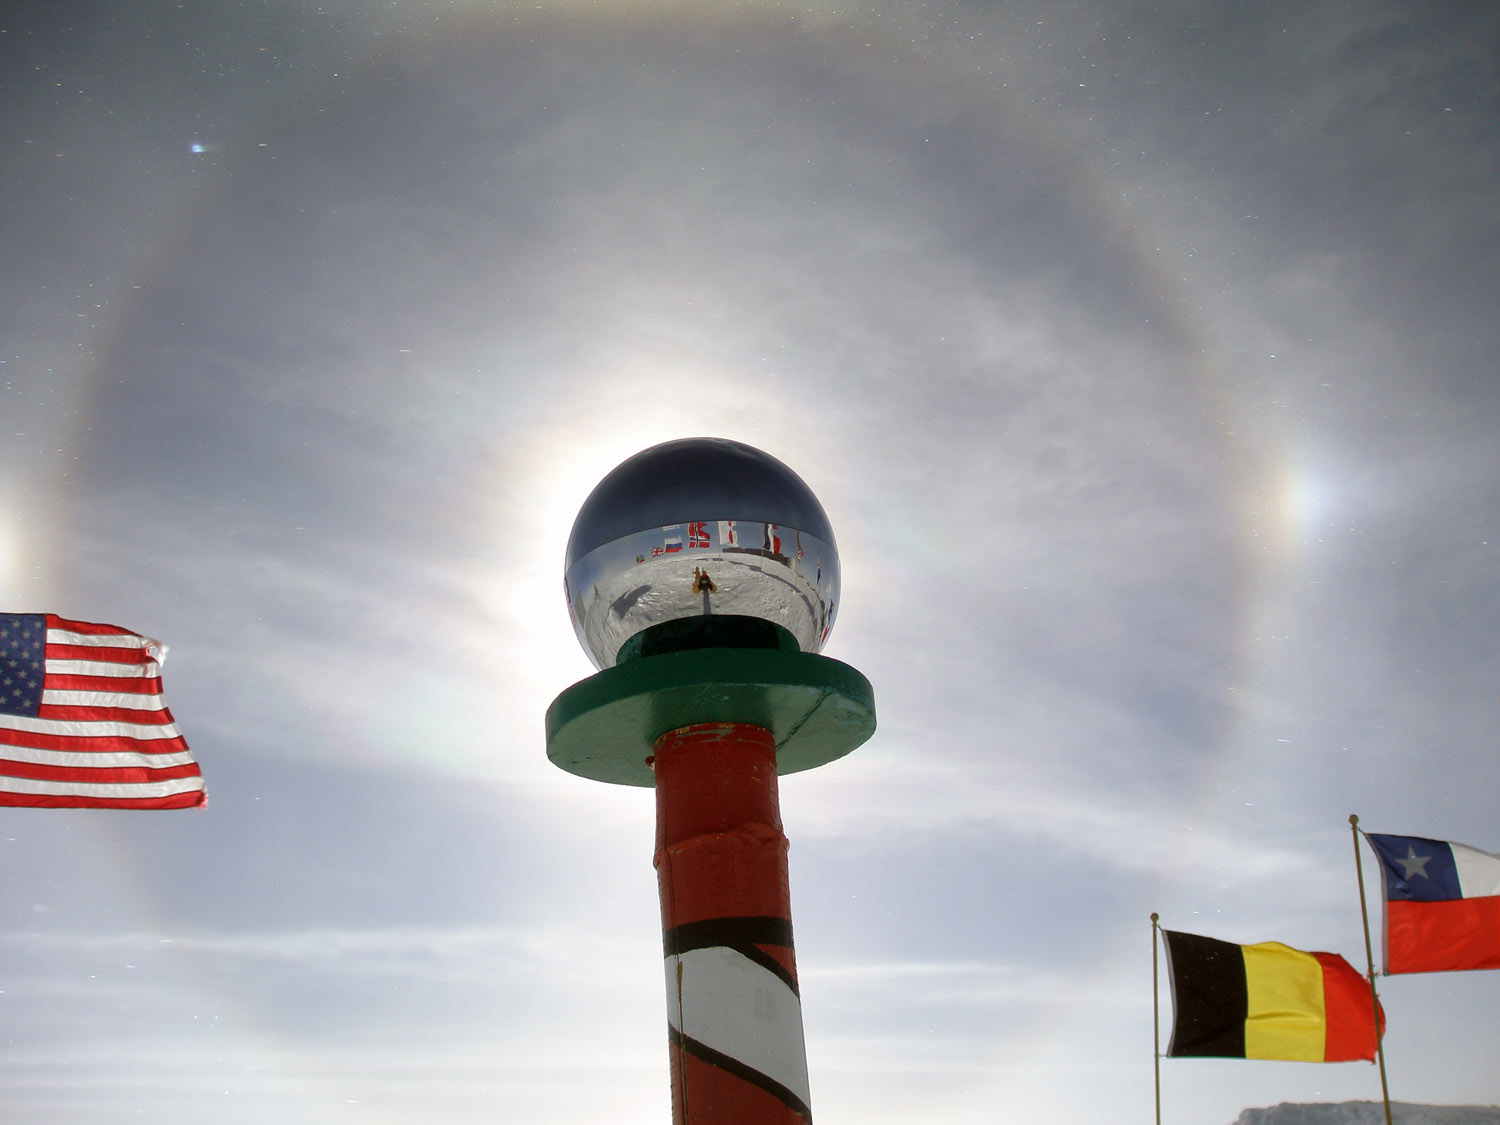 Sun Dogs and Ceremonial South Pole Marker